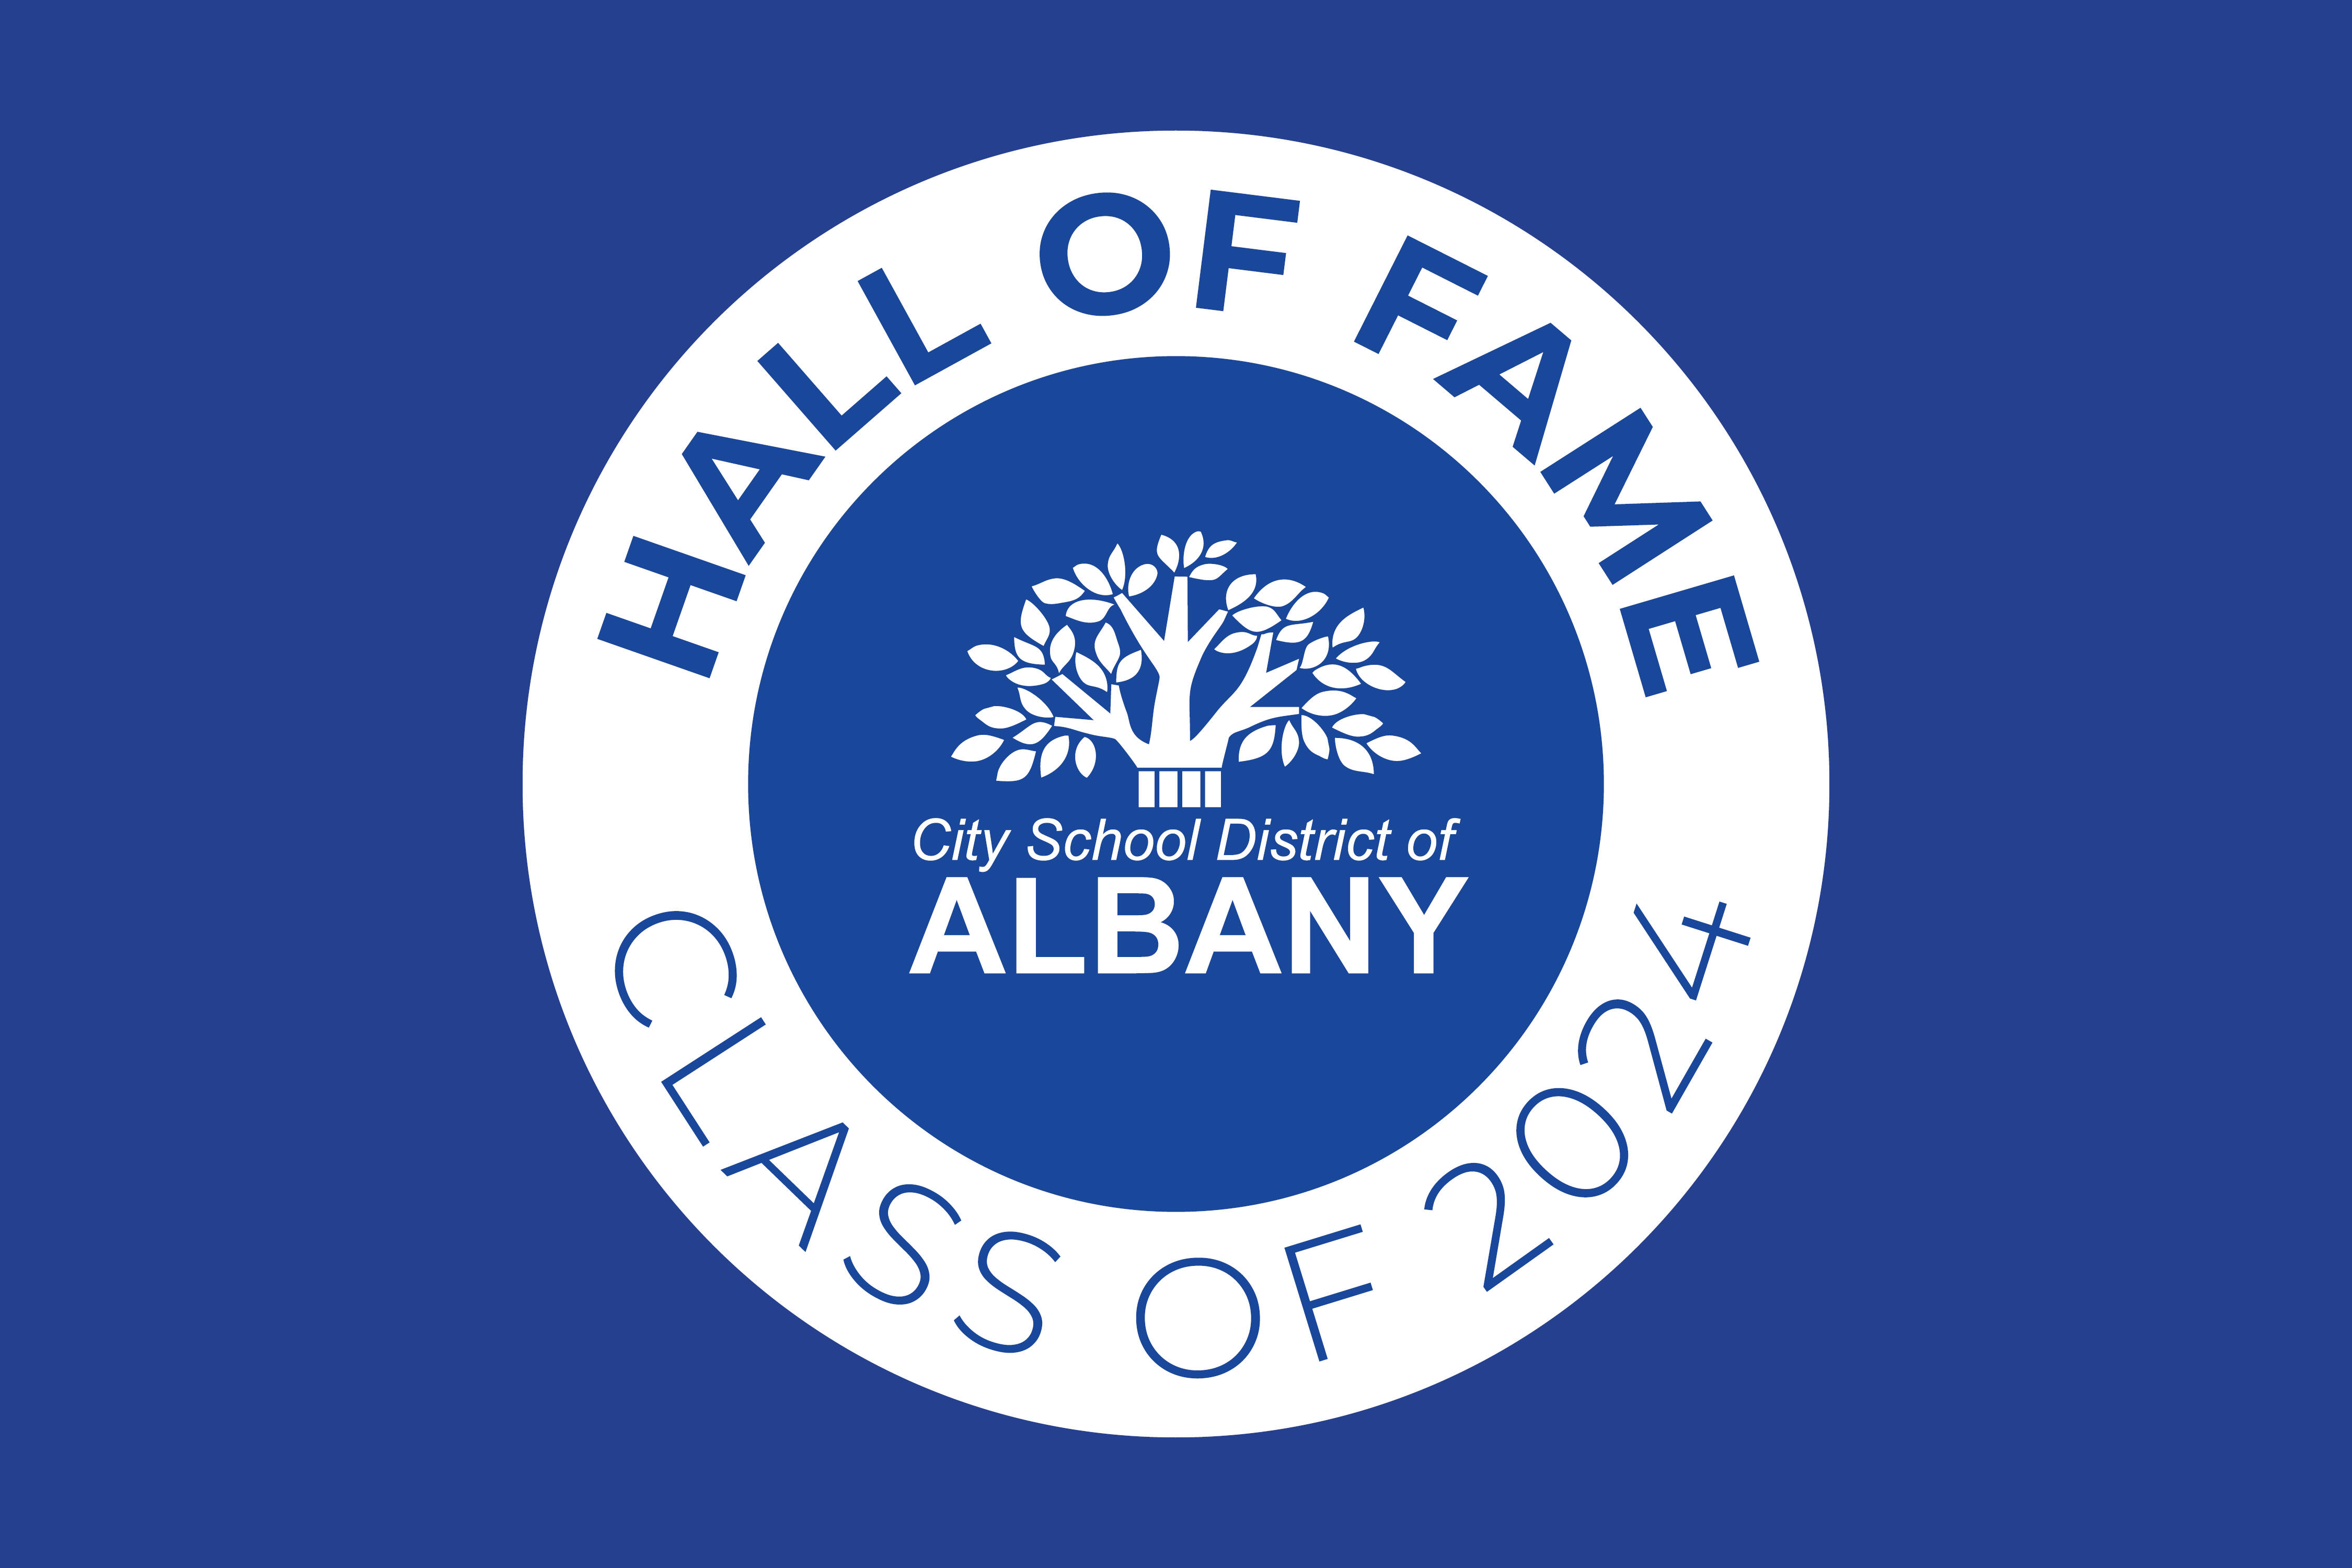 Text that reads "Hall of Fame Class of 2024" along with the district logo